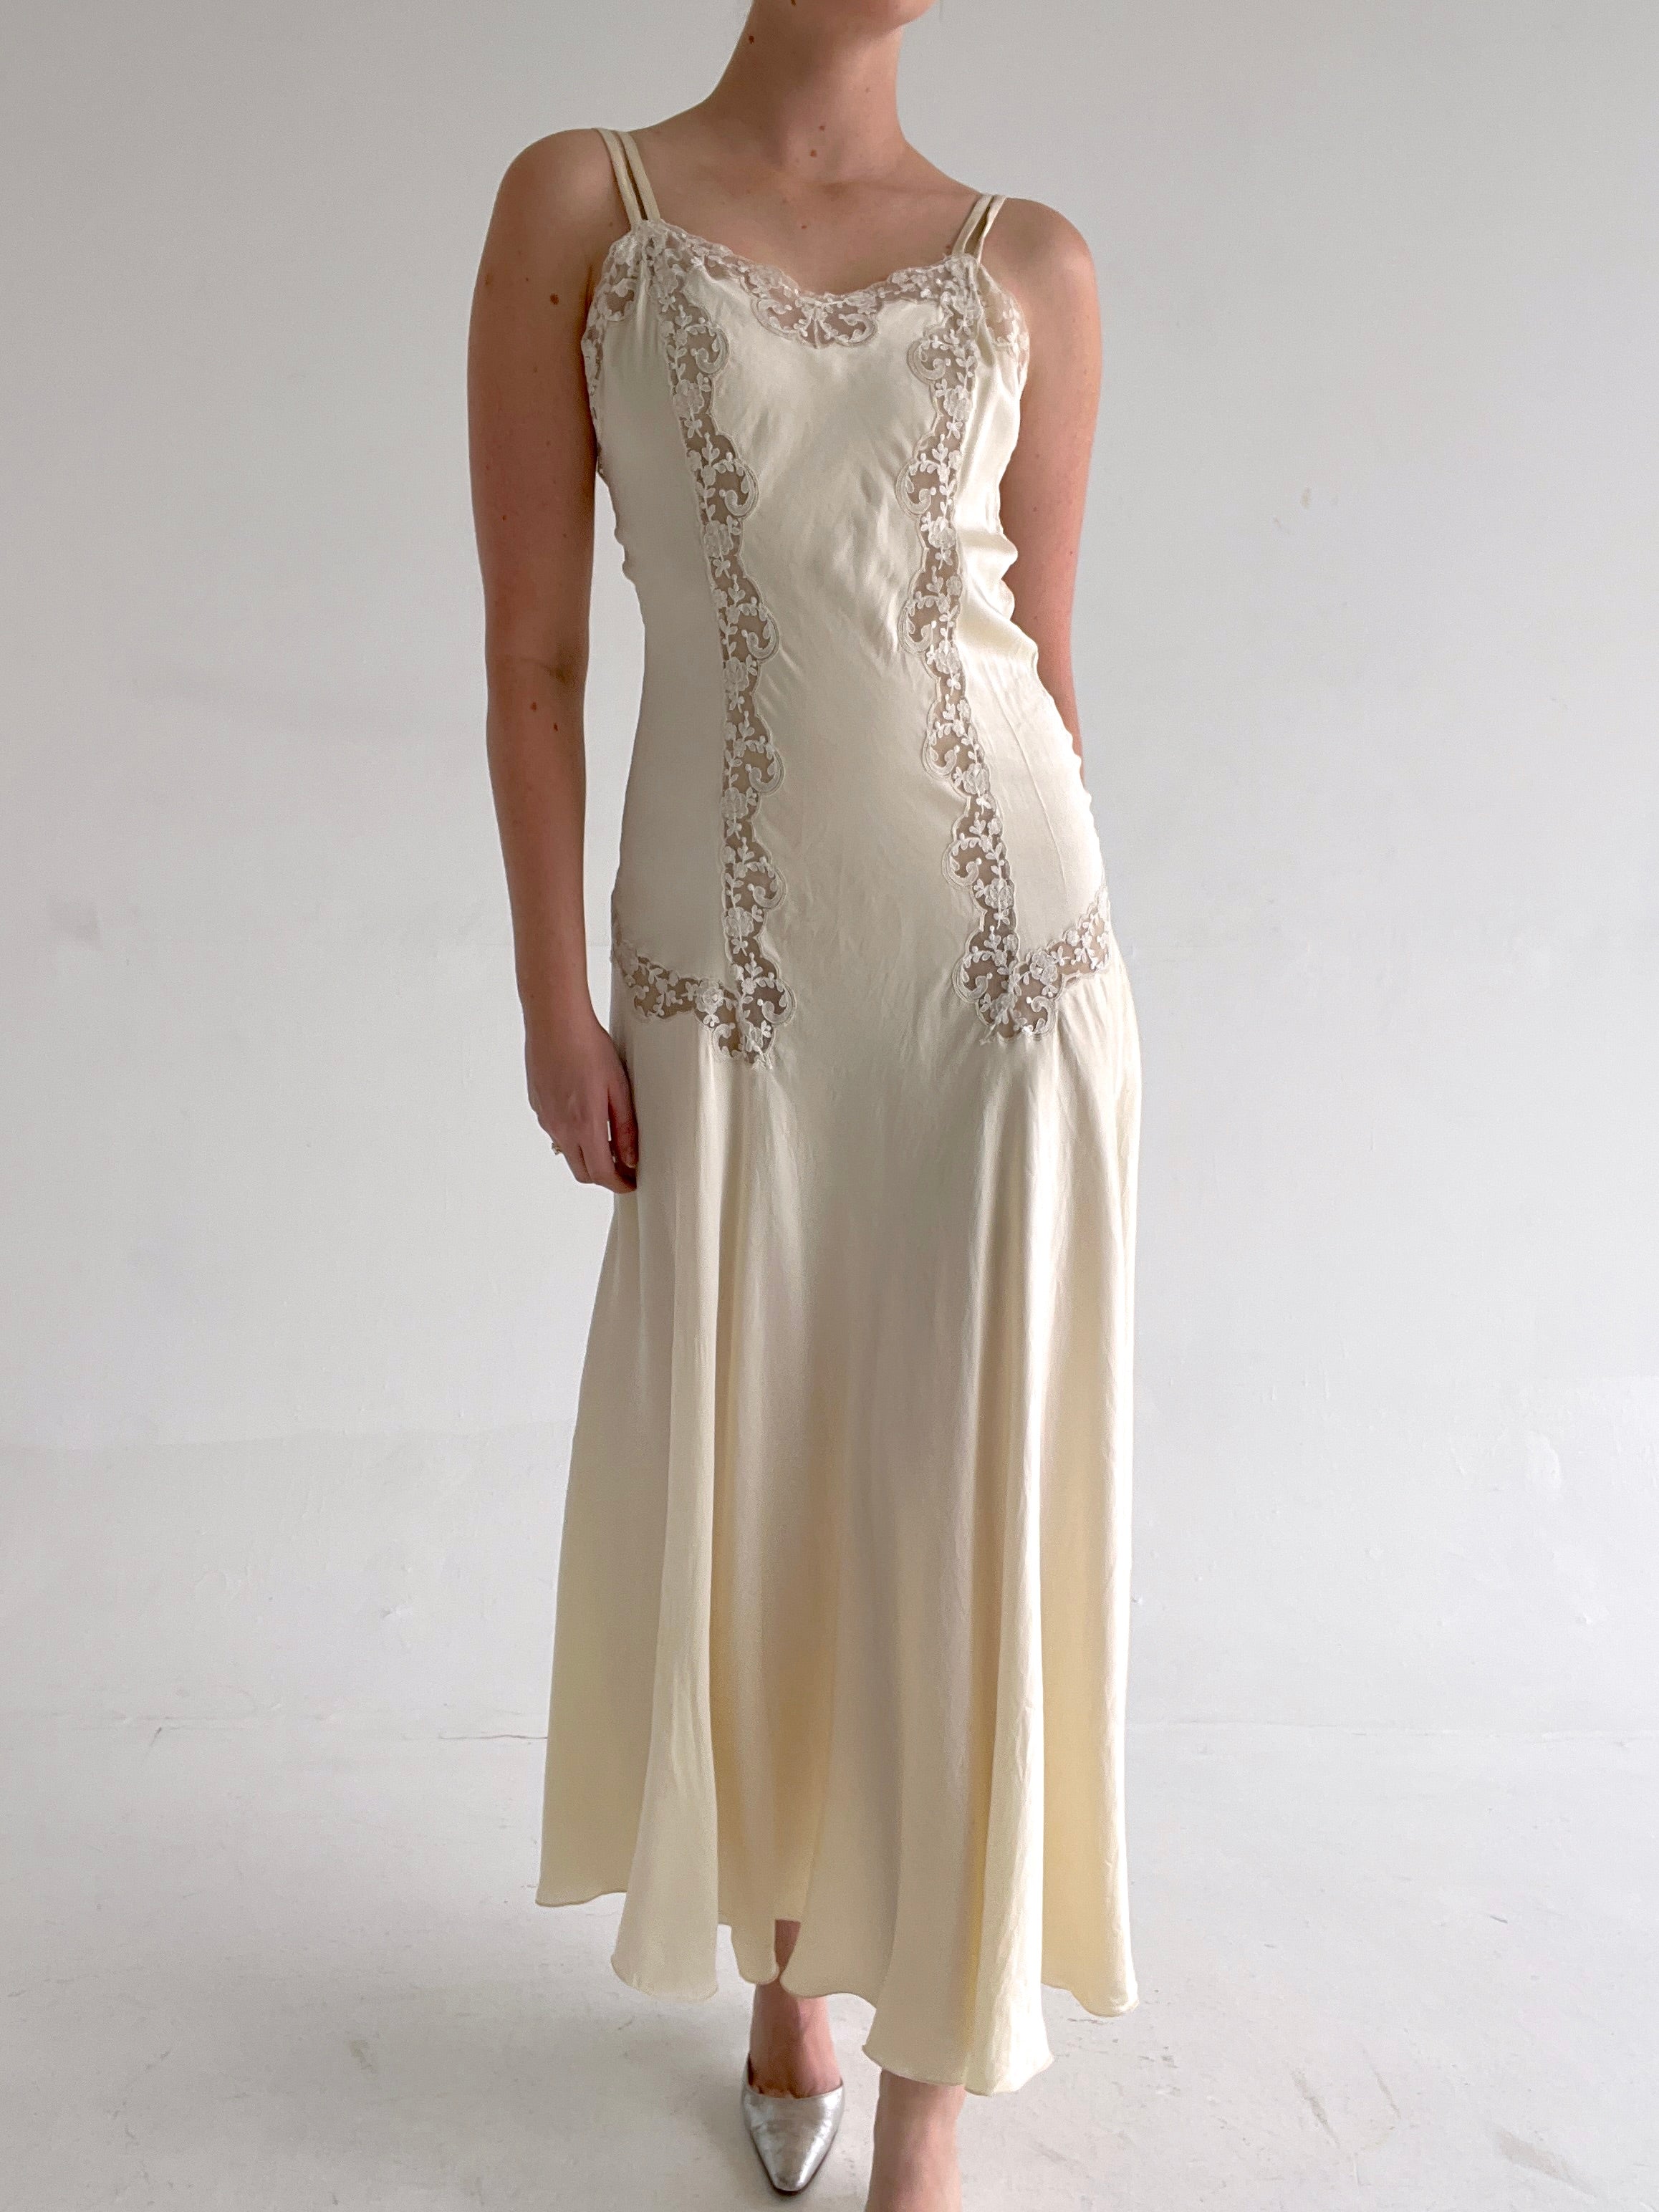 1930's Cream Silk Dress with White Lace Inserts